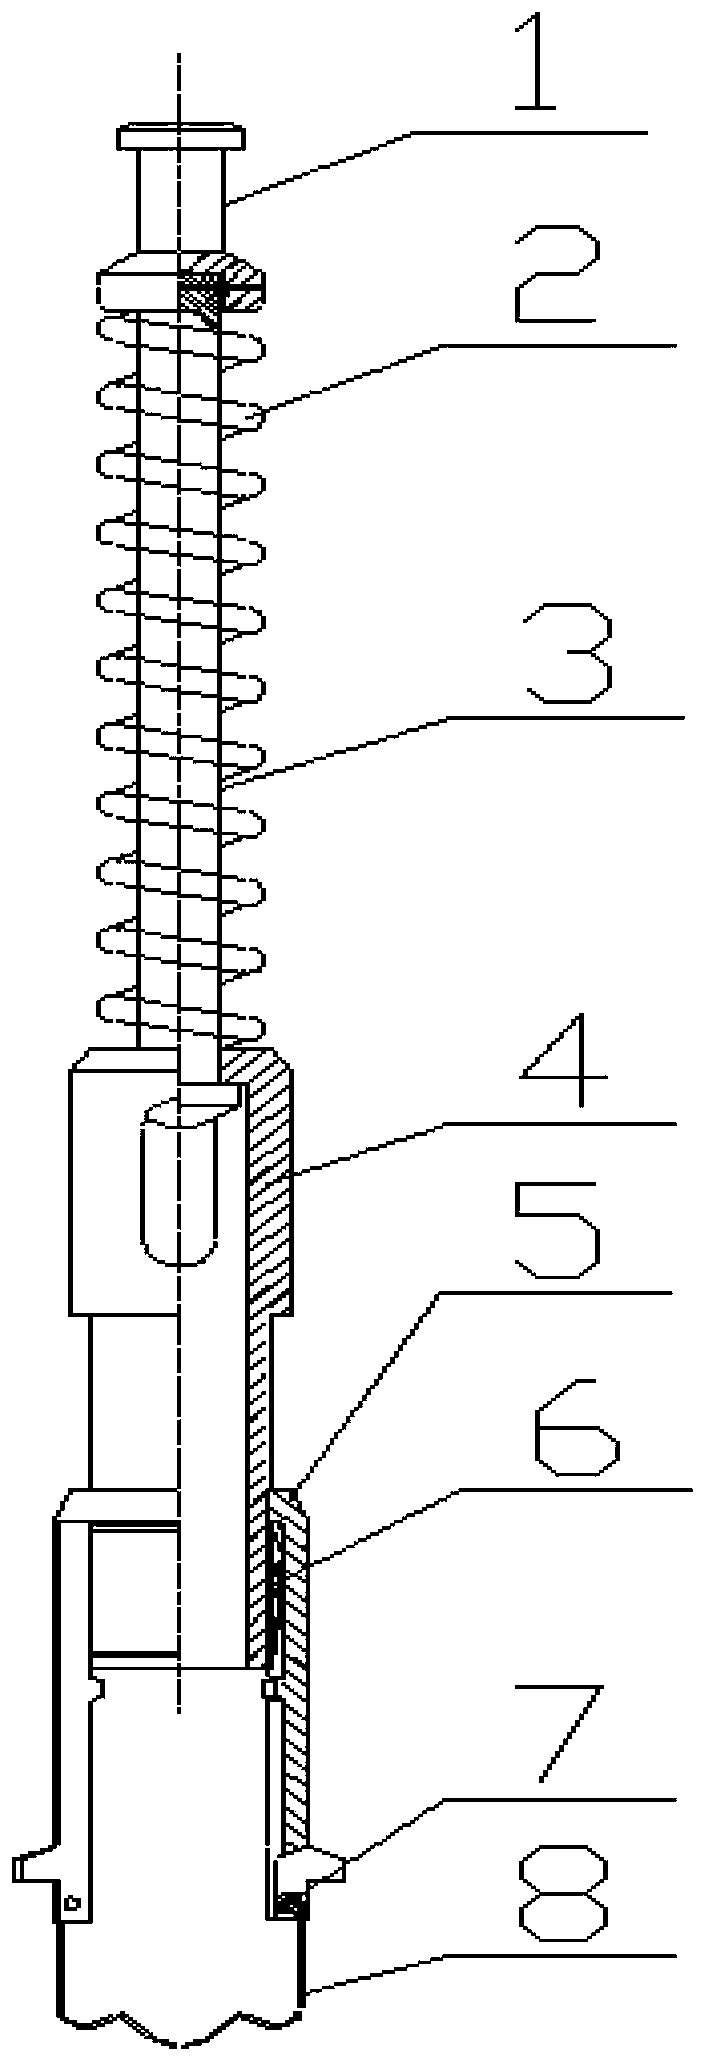 Split plunger device for non-shut-in continuous production